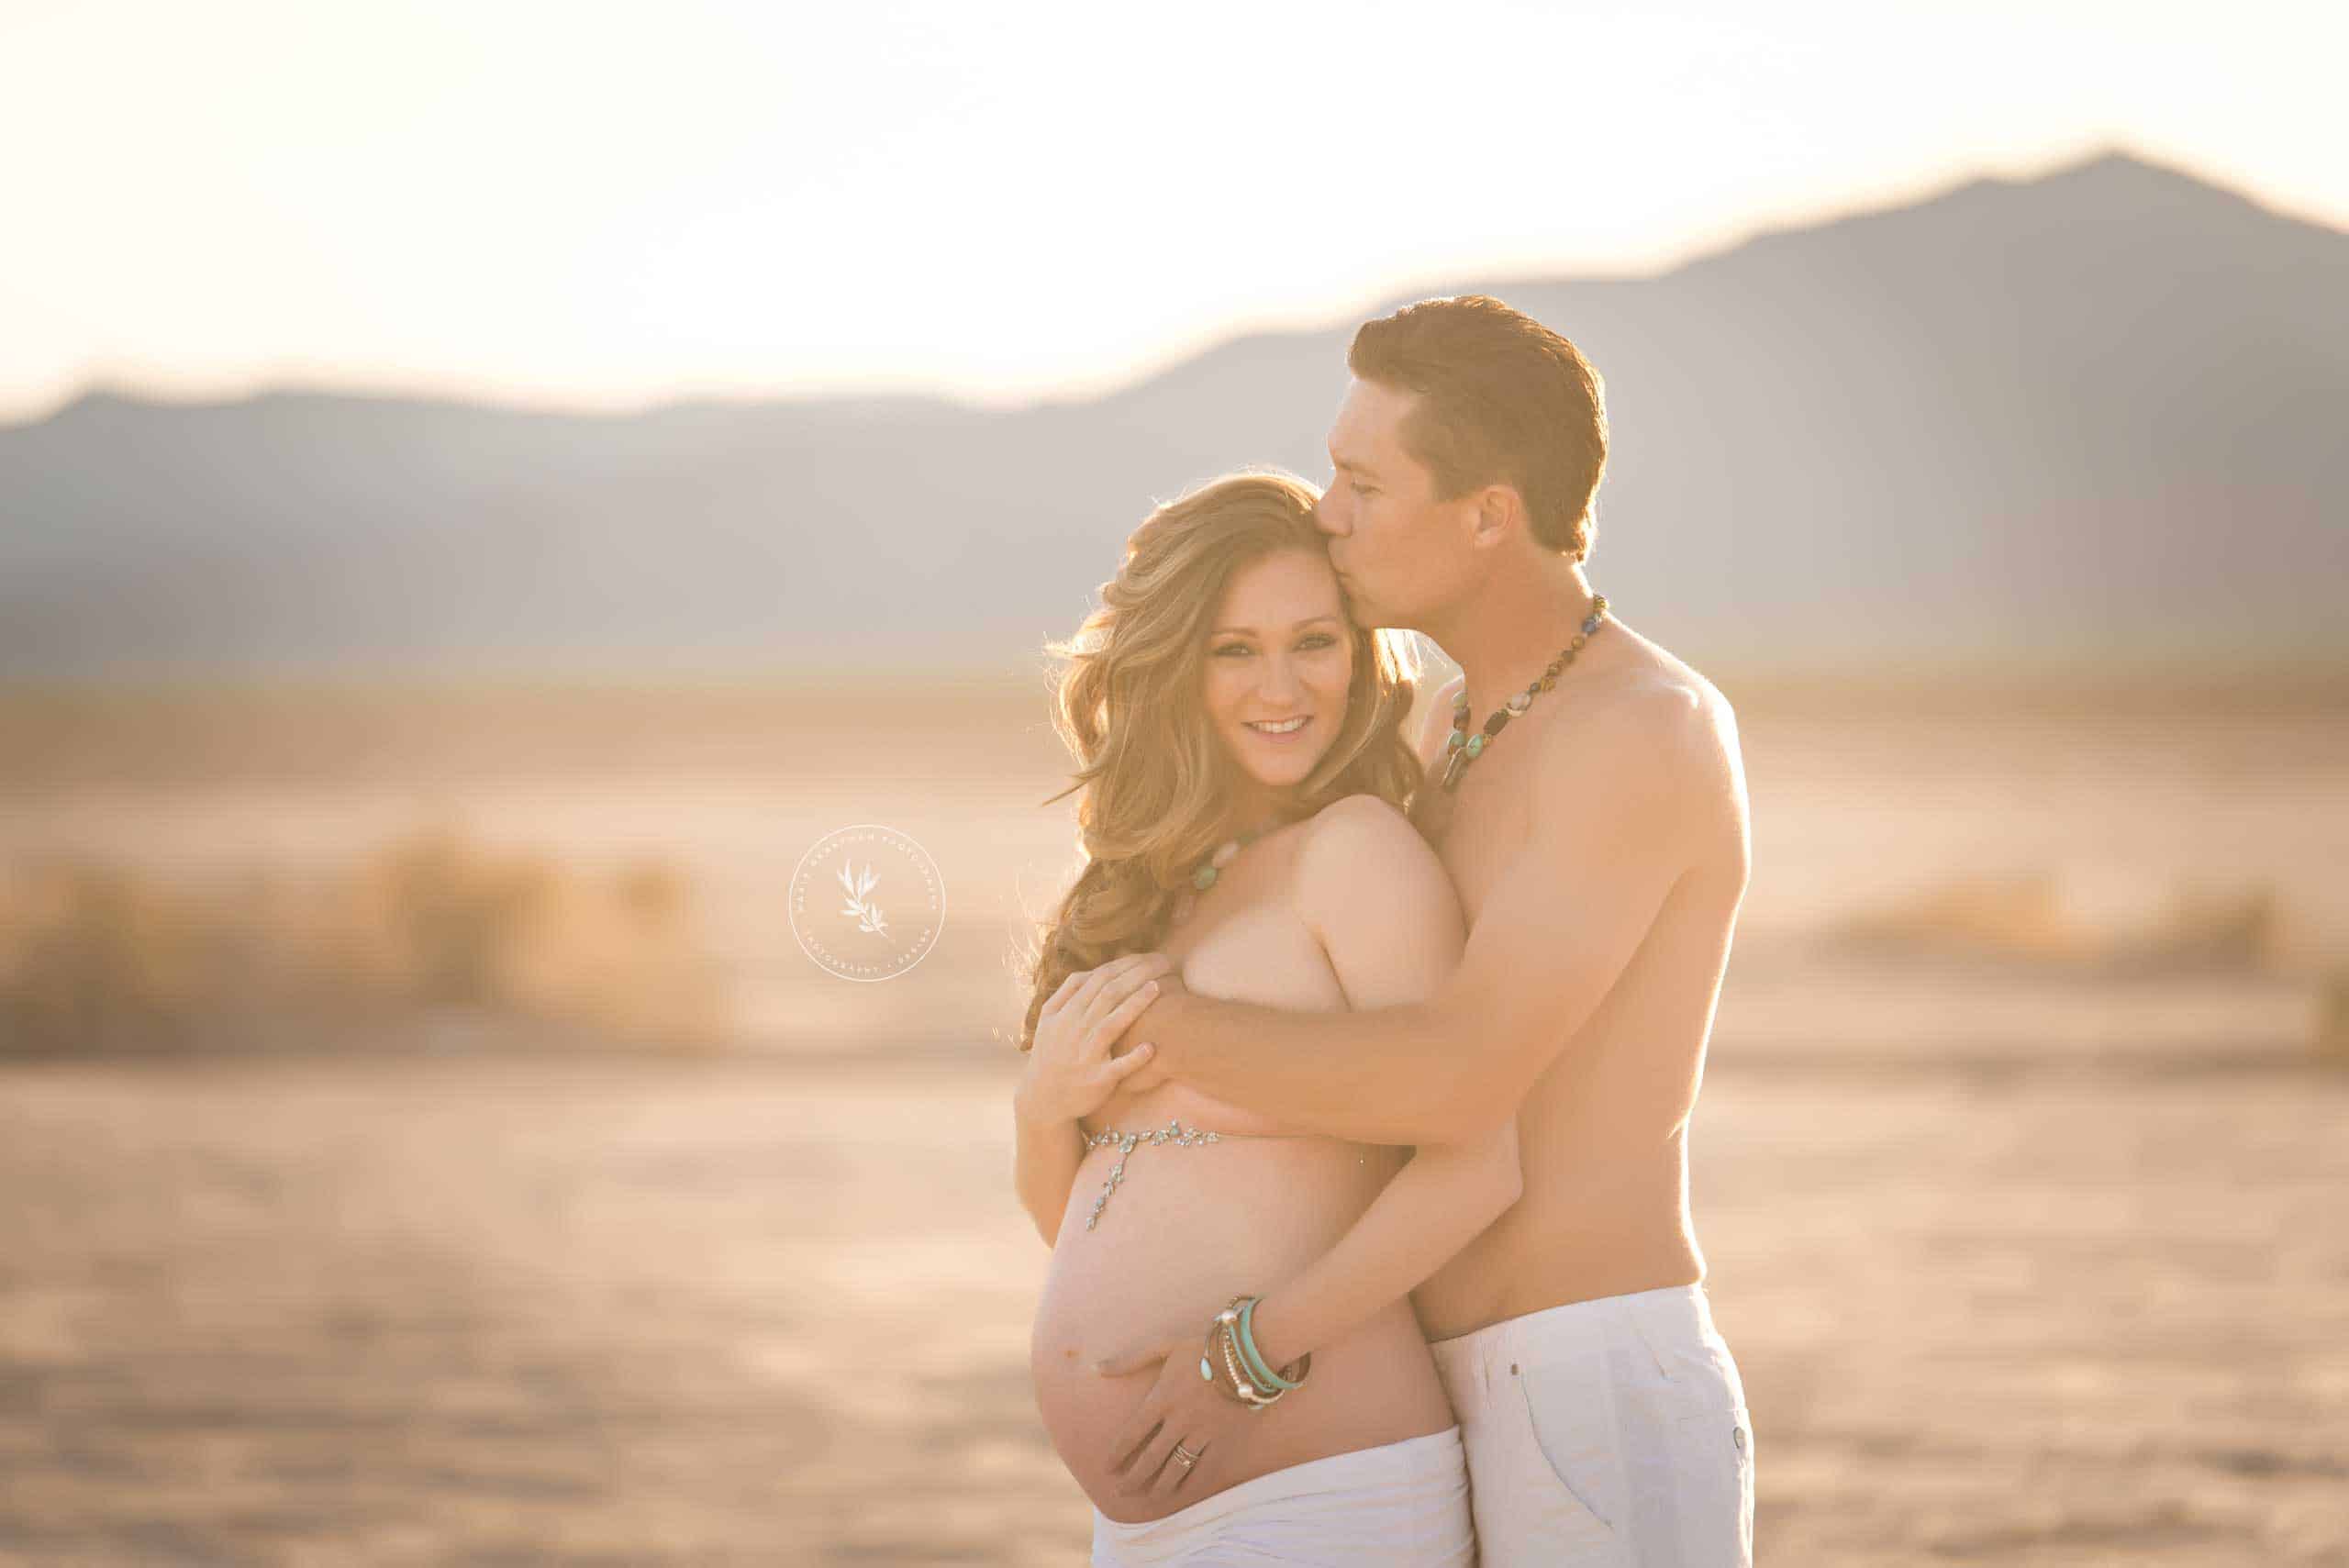 marie_grantham_Photography_maternity_photographer_Las_Vegas_dry_lake_bed_couples_maternity_photos